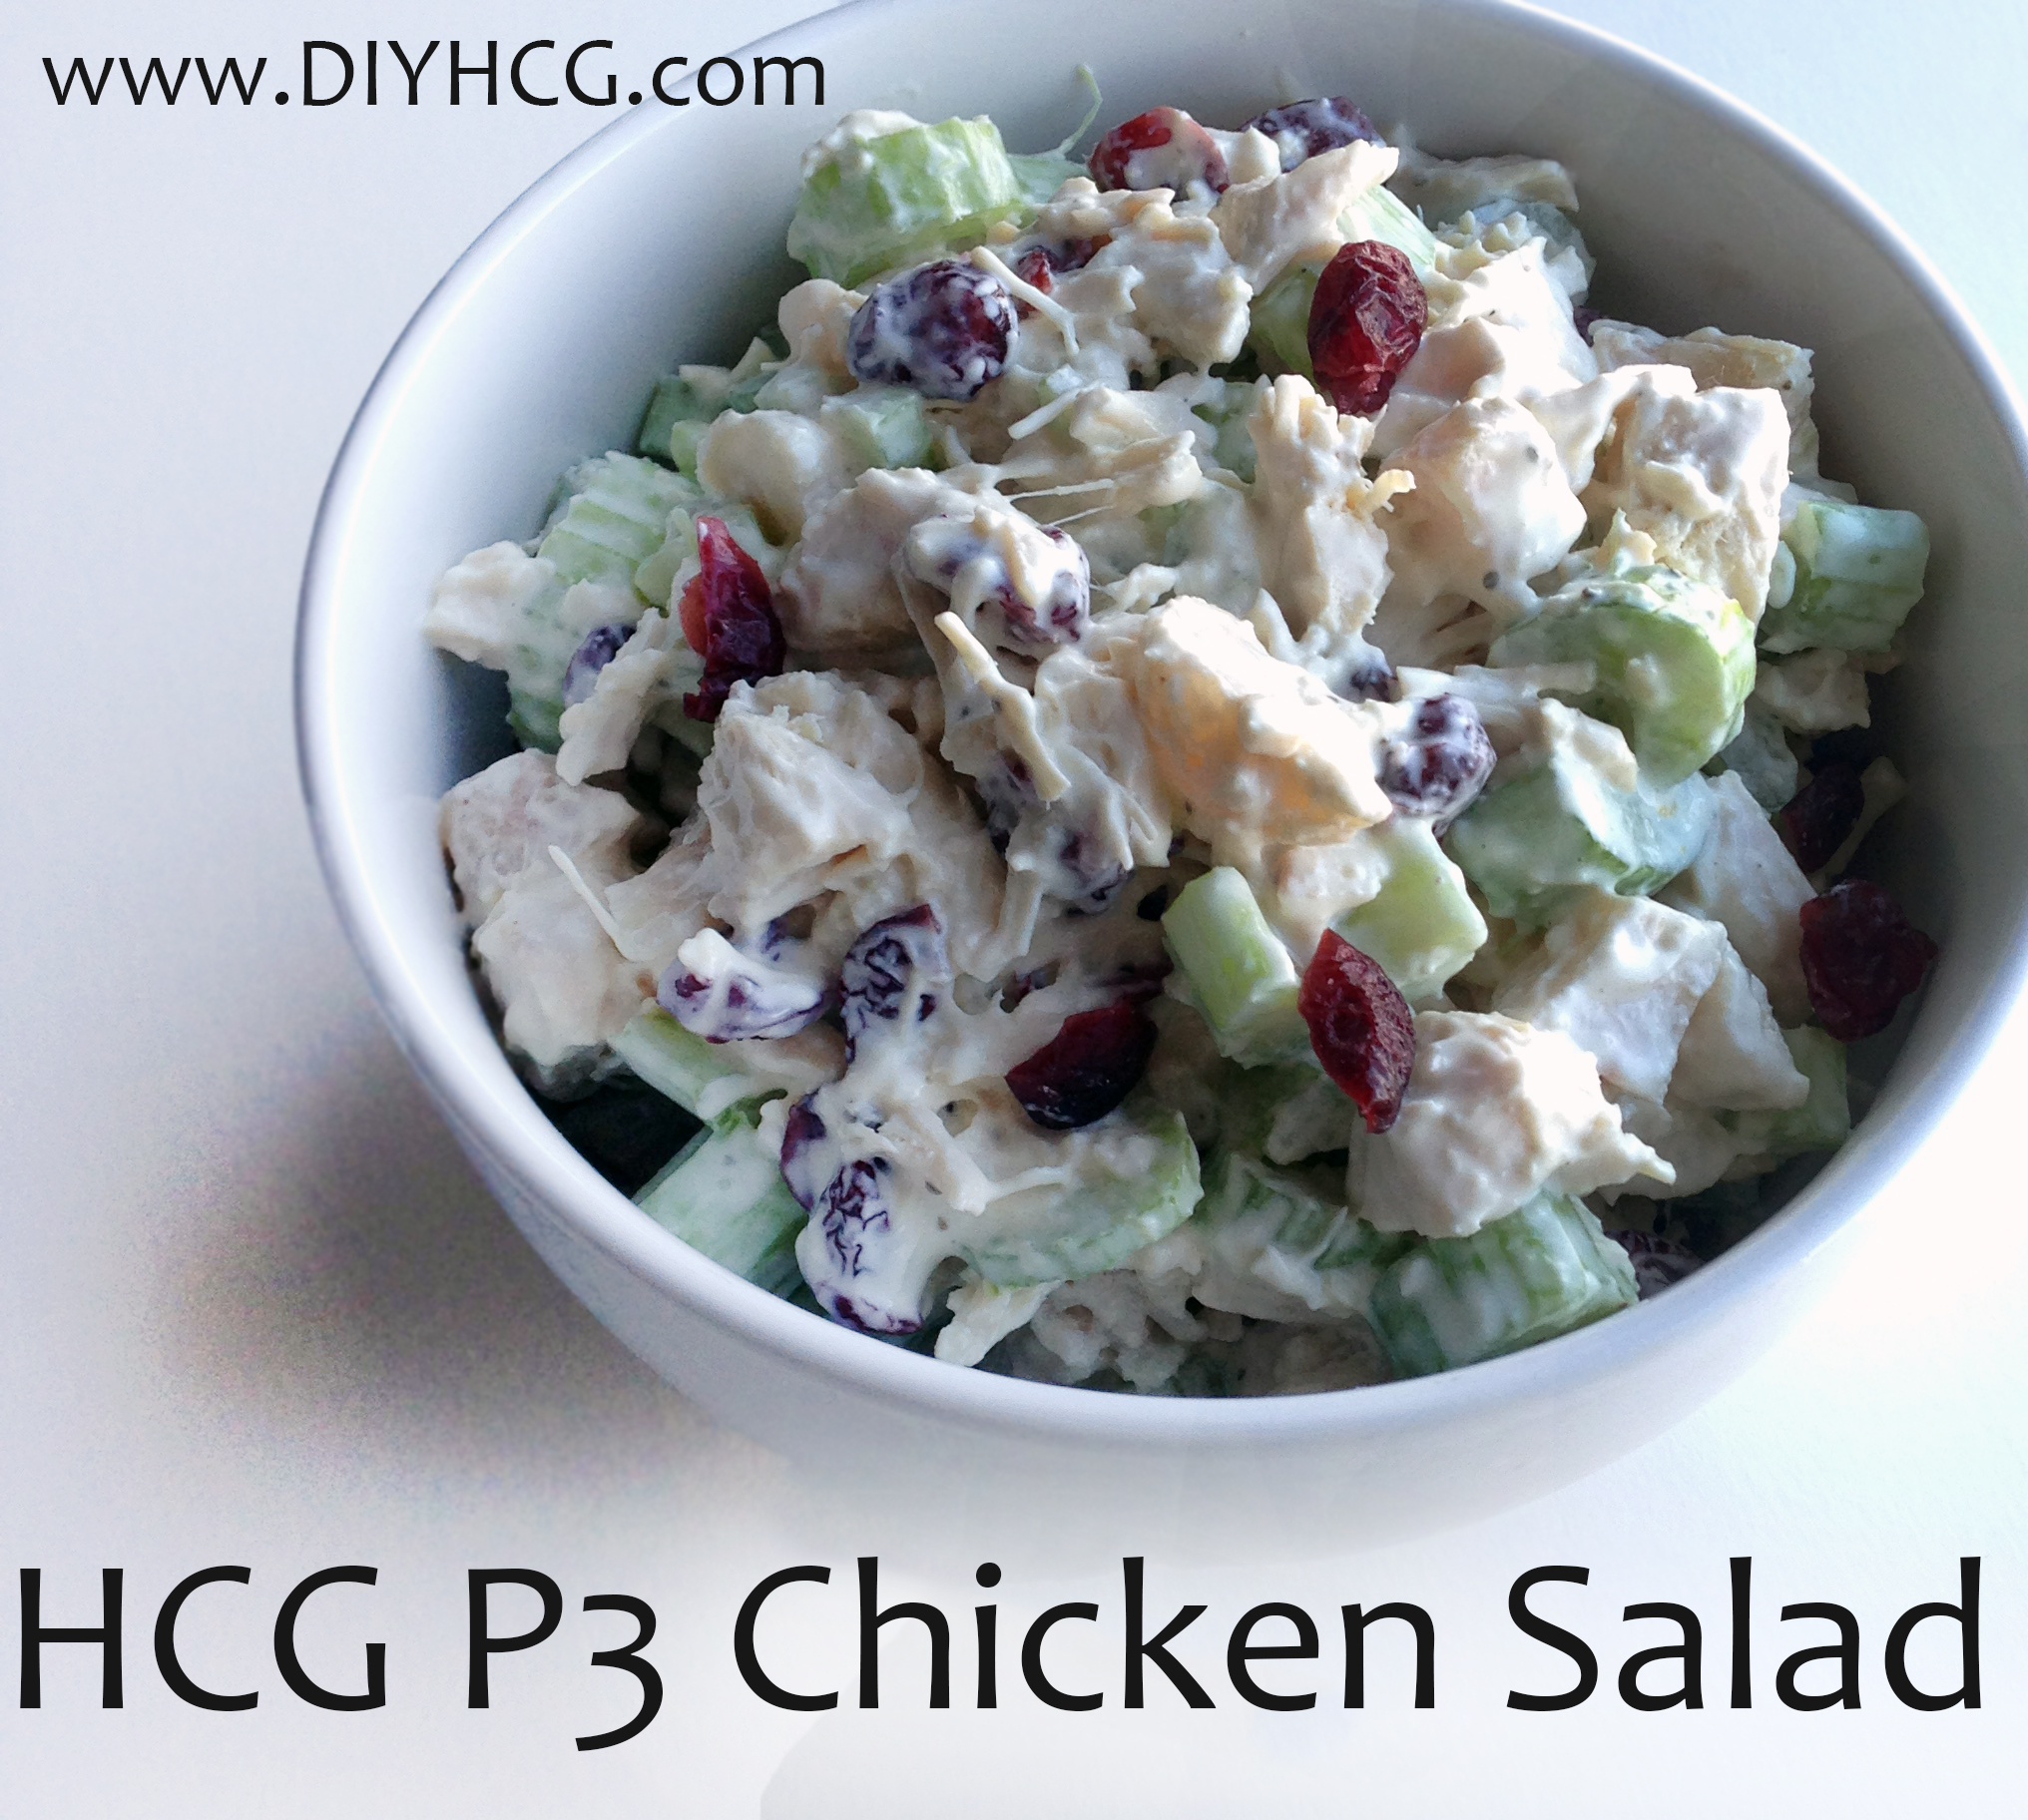 Cranberry, Celery, Chicken Salad Recipe for phase 3 of the HCG diet... yum! 